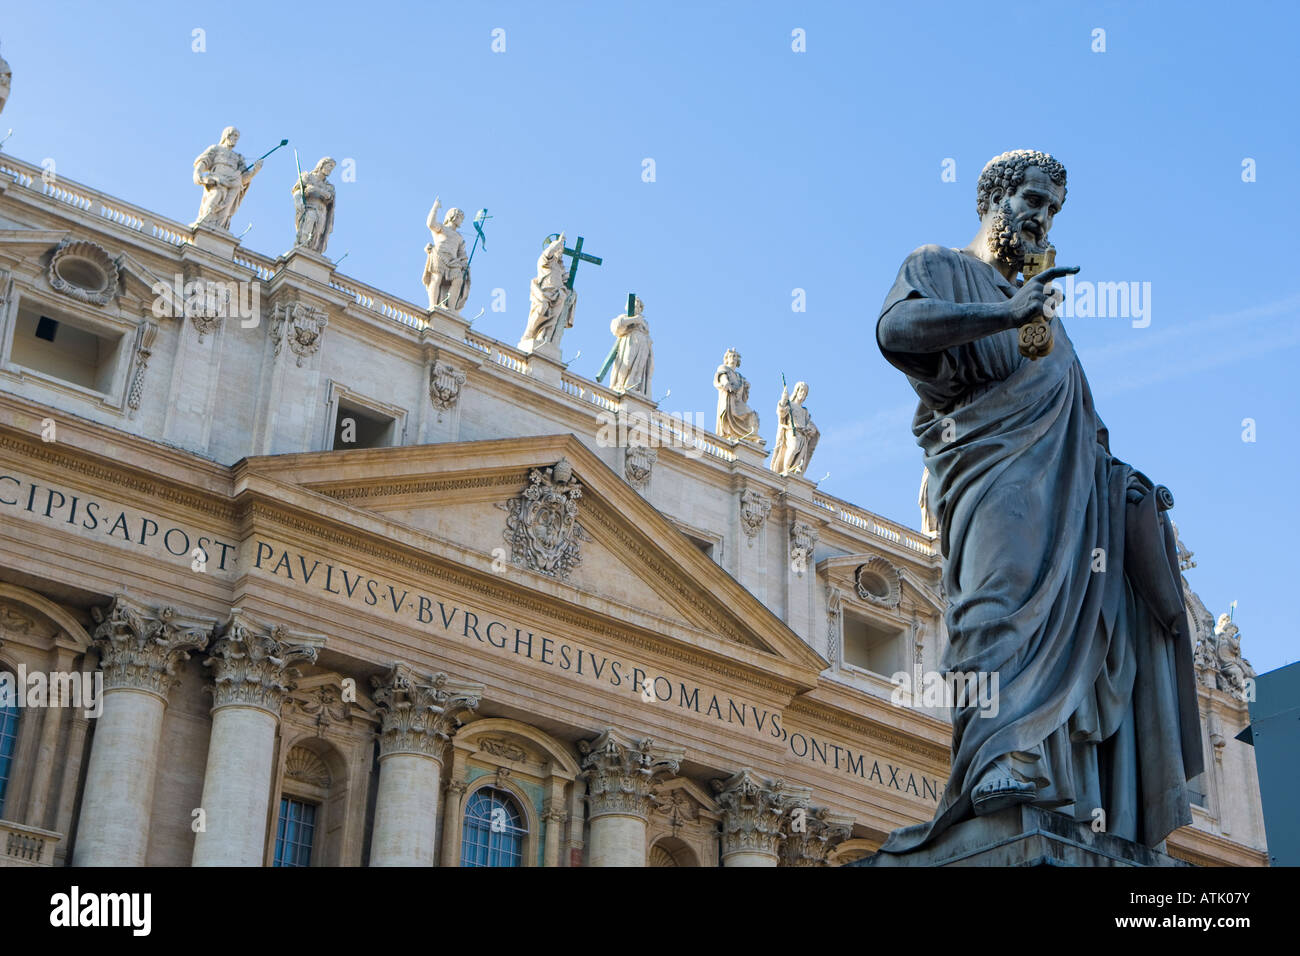 Statue in front Saint Peter Basilica, St. Peter's Square, Vatican City, Holy See, Rome / Roma, Italy / Italia Stock Photo